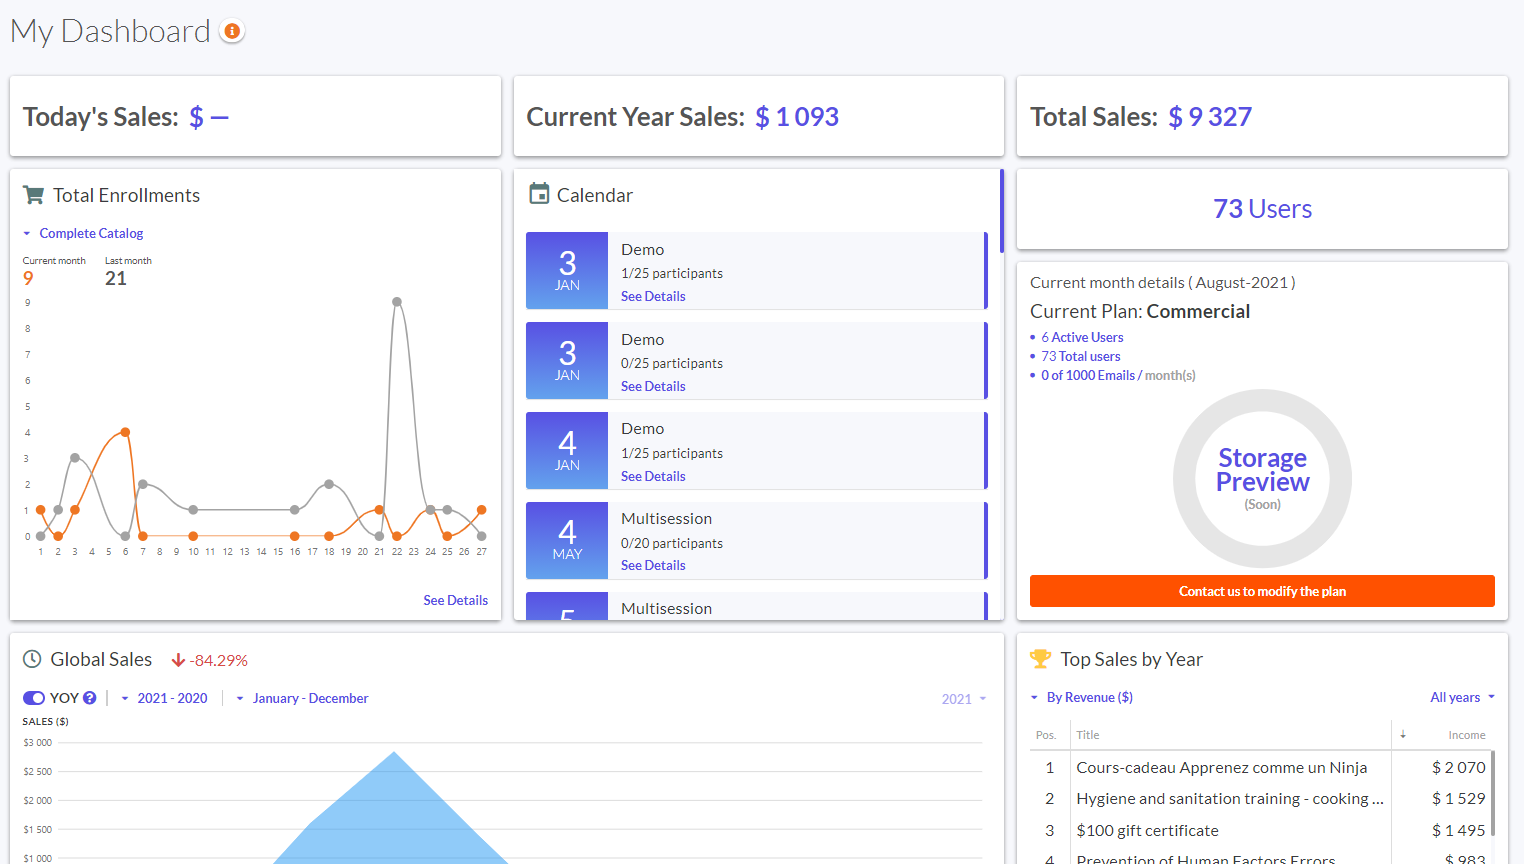 Dashboard with interactive widgets and links to detailed reports